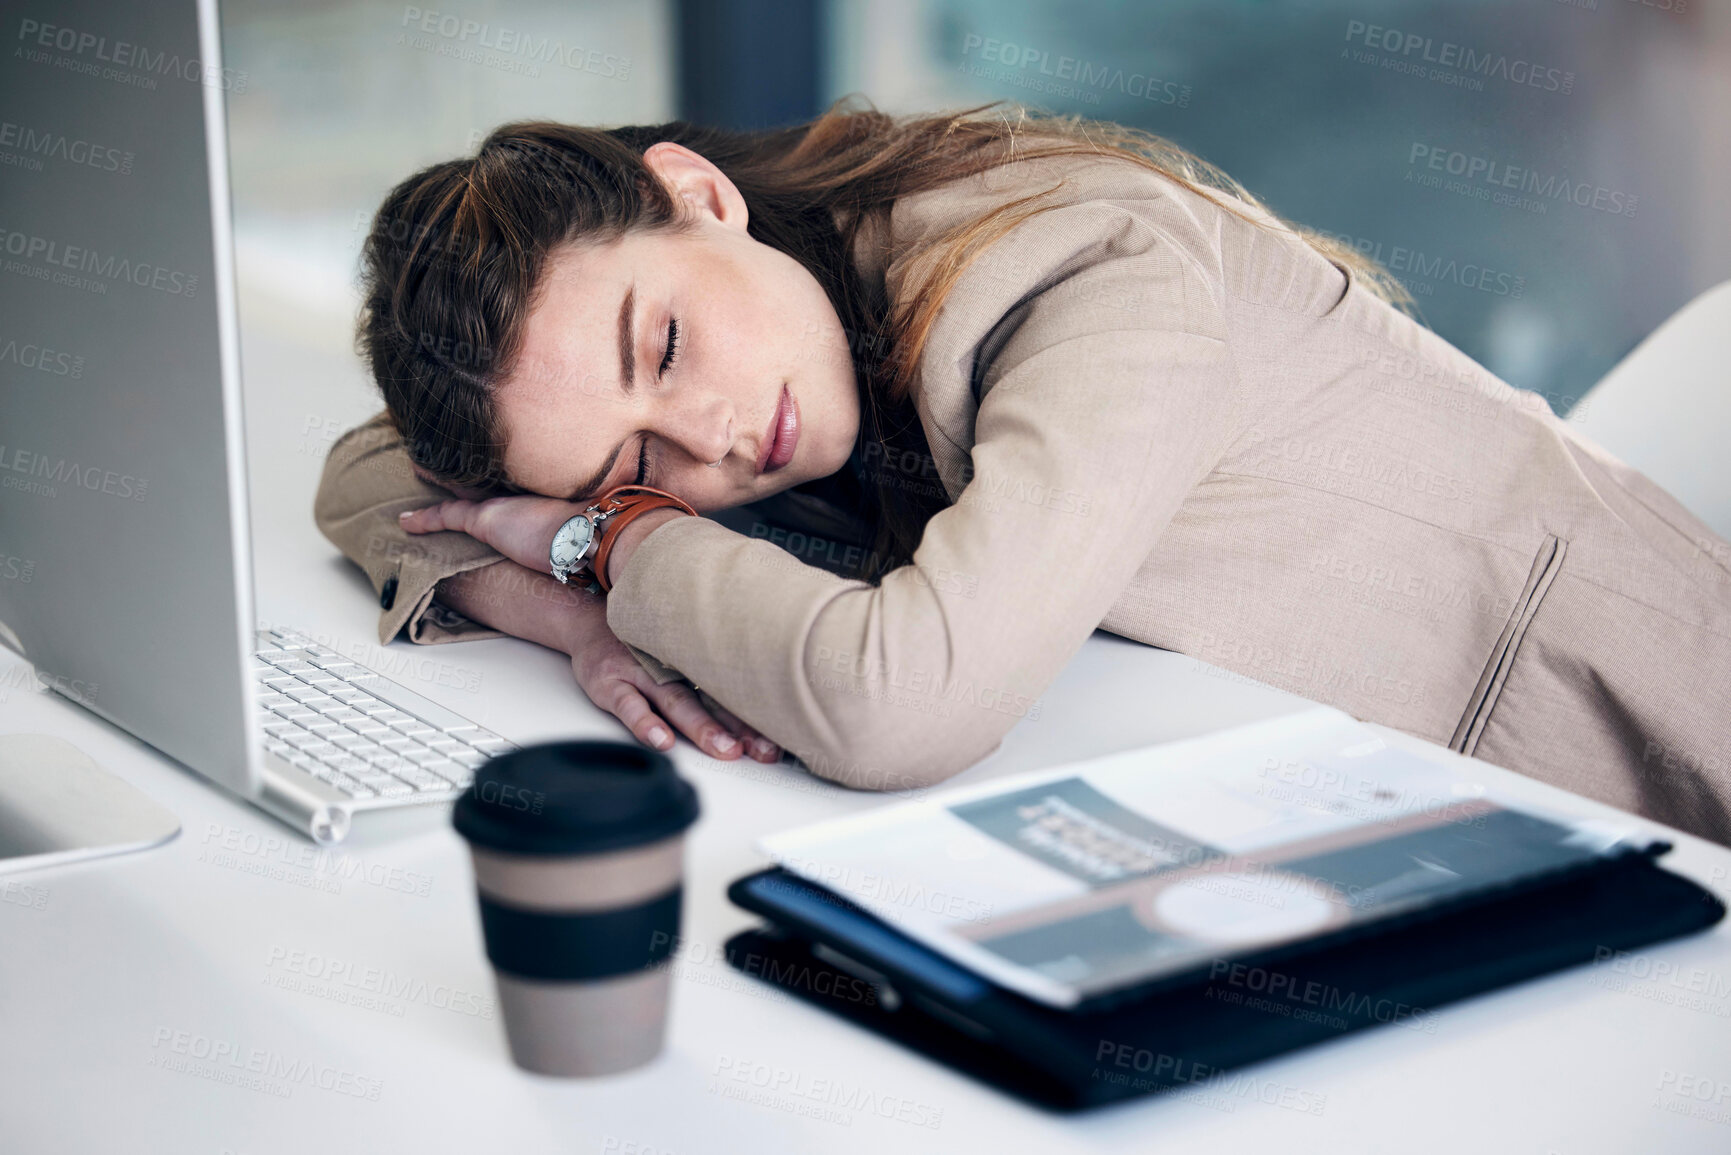 Buy stock photo Tired business woman, sleeping and burnout, stress or mental breakdown on office desk. Exhausted female person or employee resting head on table in depression, anxiety or overworked at the workplace